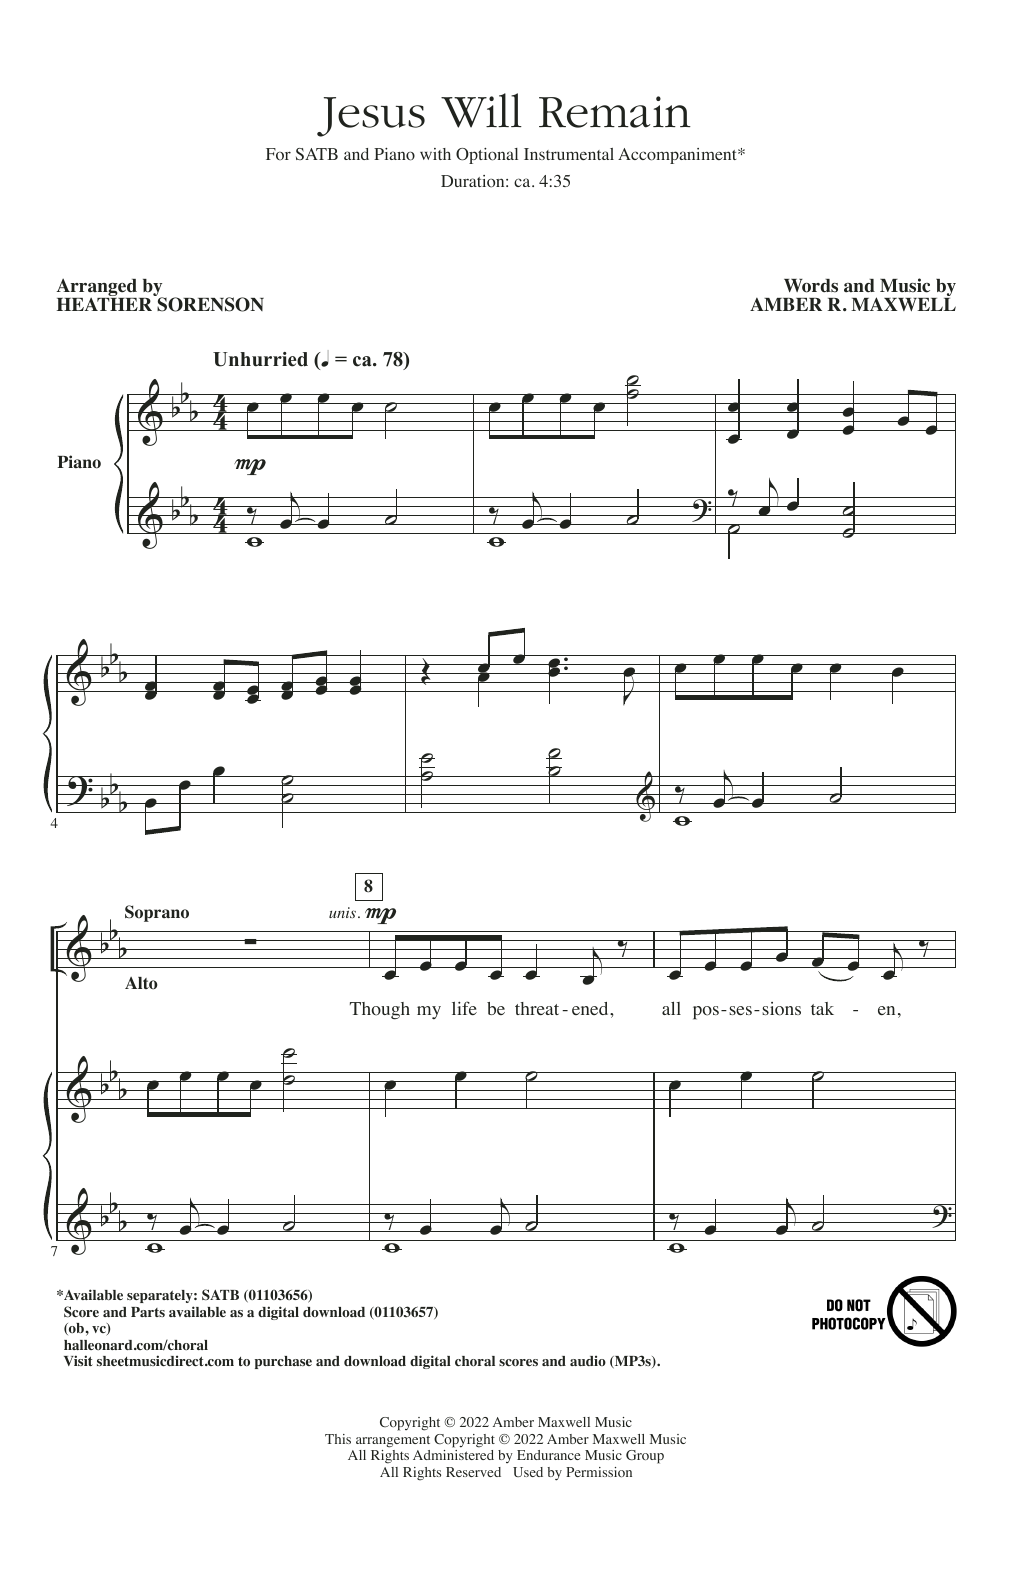 Download Amber R. Maxwell Jesus Will Remain (arr. Heather Sorenso Sheet Music